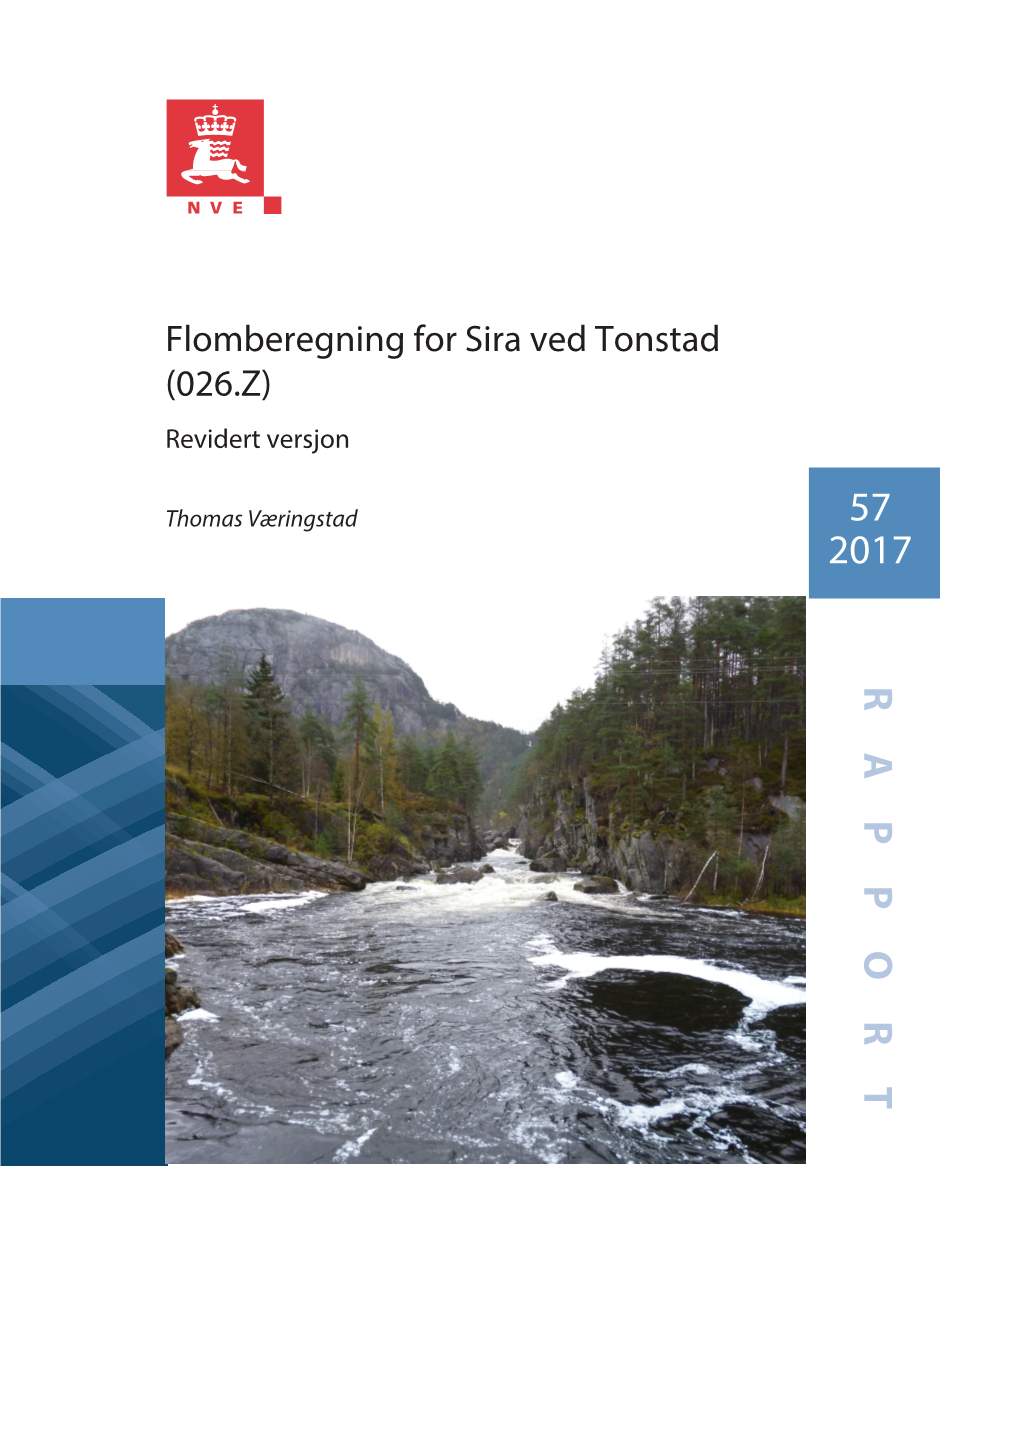 Flomberegning for Sira Ved Tonstad (026.Z)